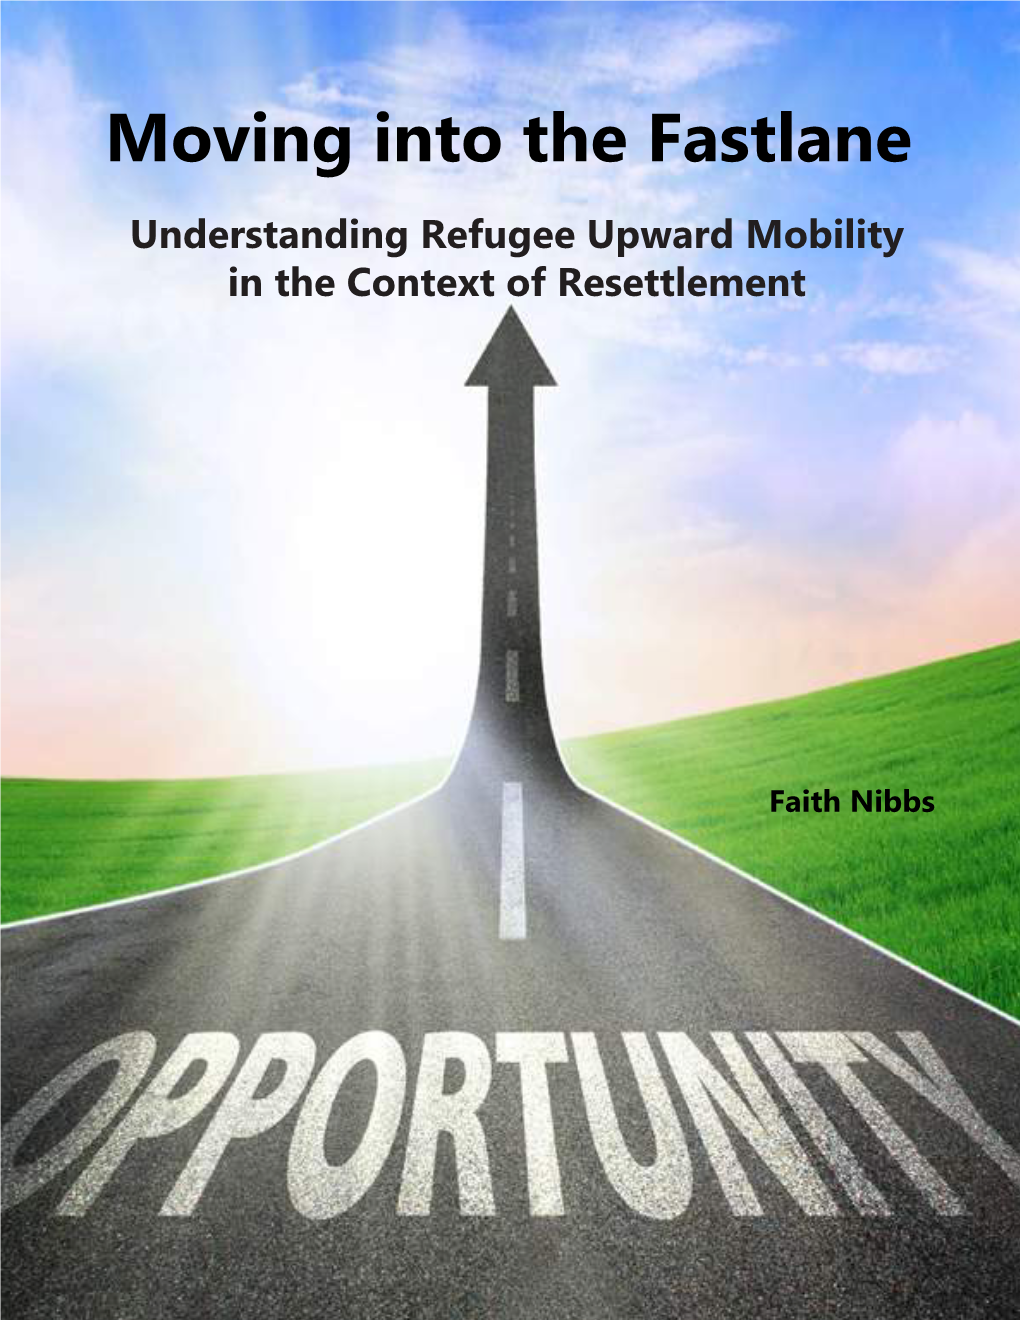 Moving Into the Fastlane Understanding Refugee Upward Mobility in the Context of Resettlement